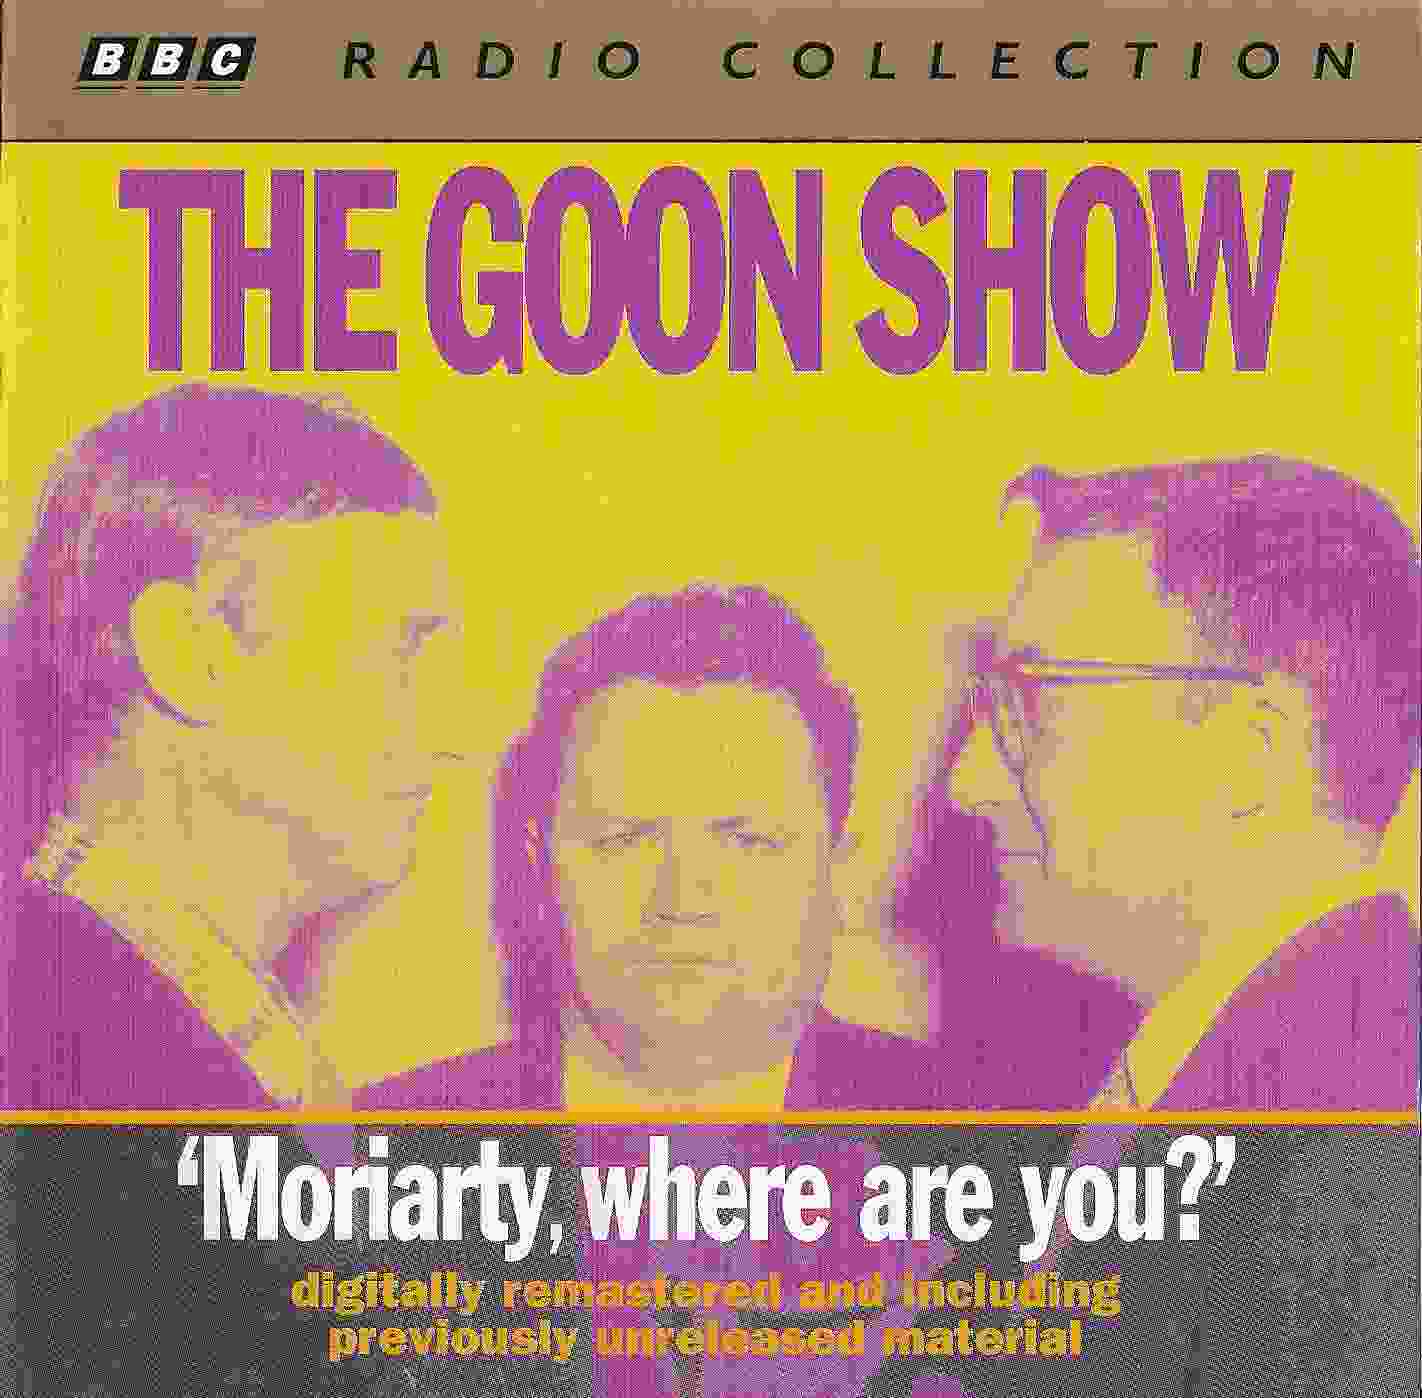 Picture of The Goon show 1 - Moriarty, where are you? by artist Spike Milligan / Larry Stephens from the BBC cds - Records and Tapes library